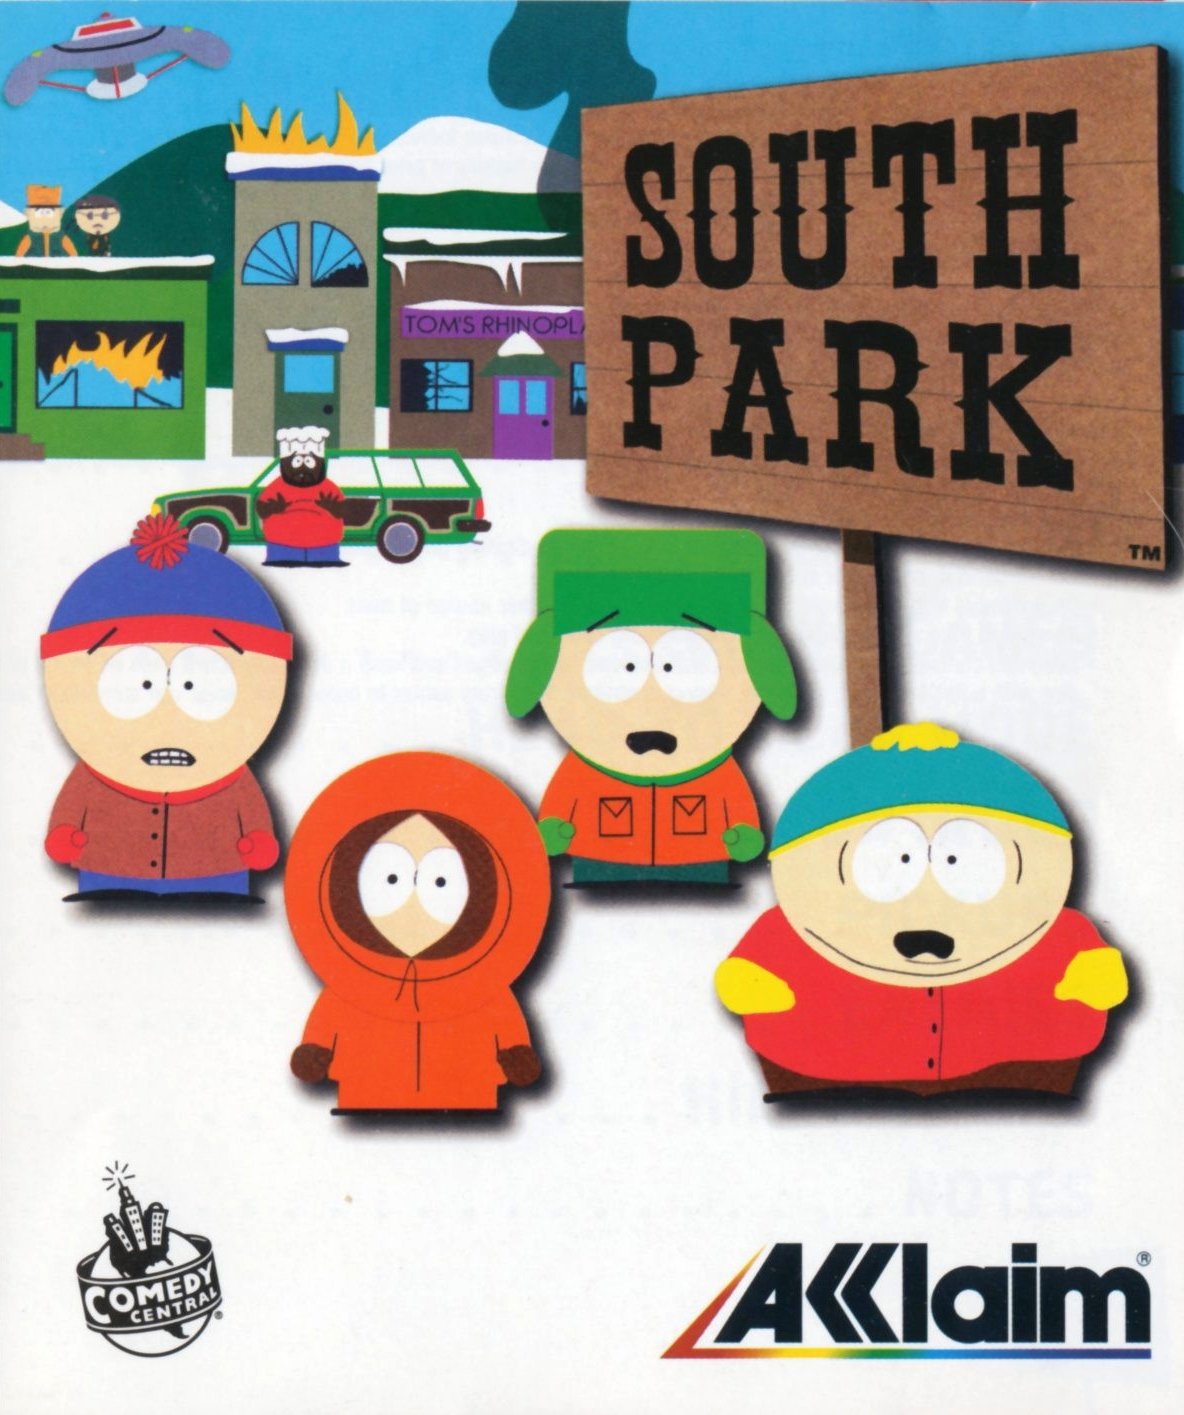 South park lets go tower defense play. Игра Южный парк PS 1. Южный парк n64. South Park обложка. South Park ps1.